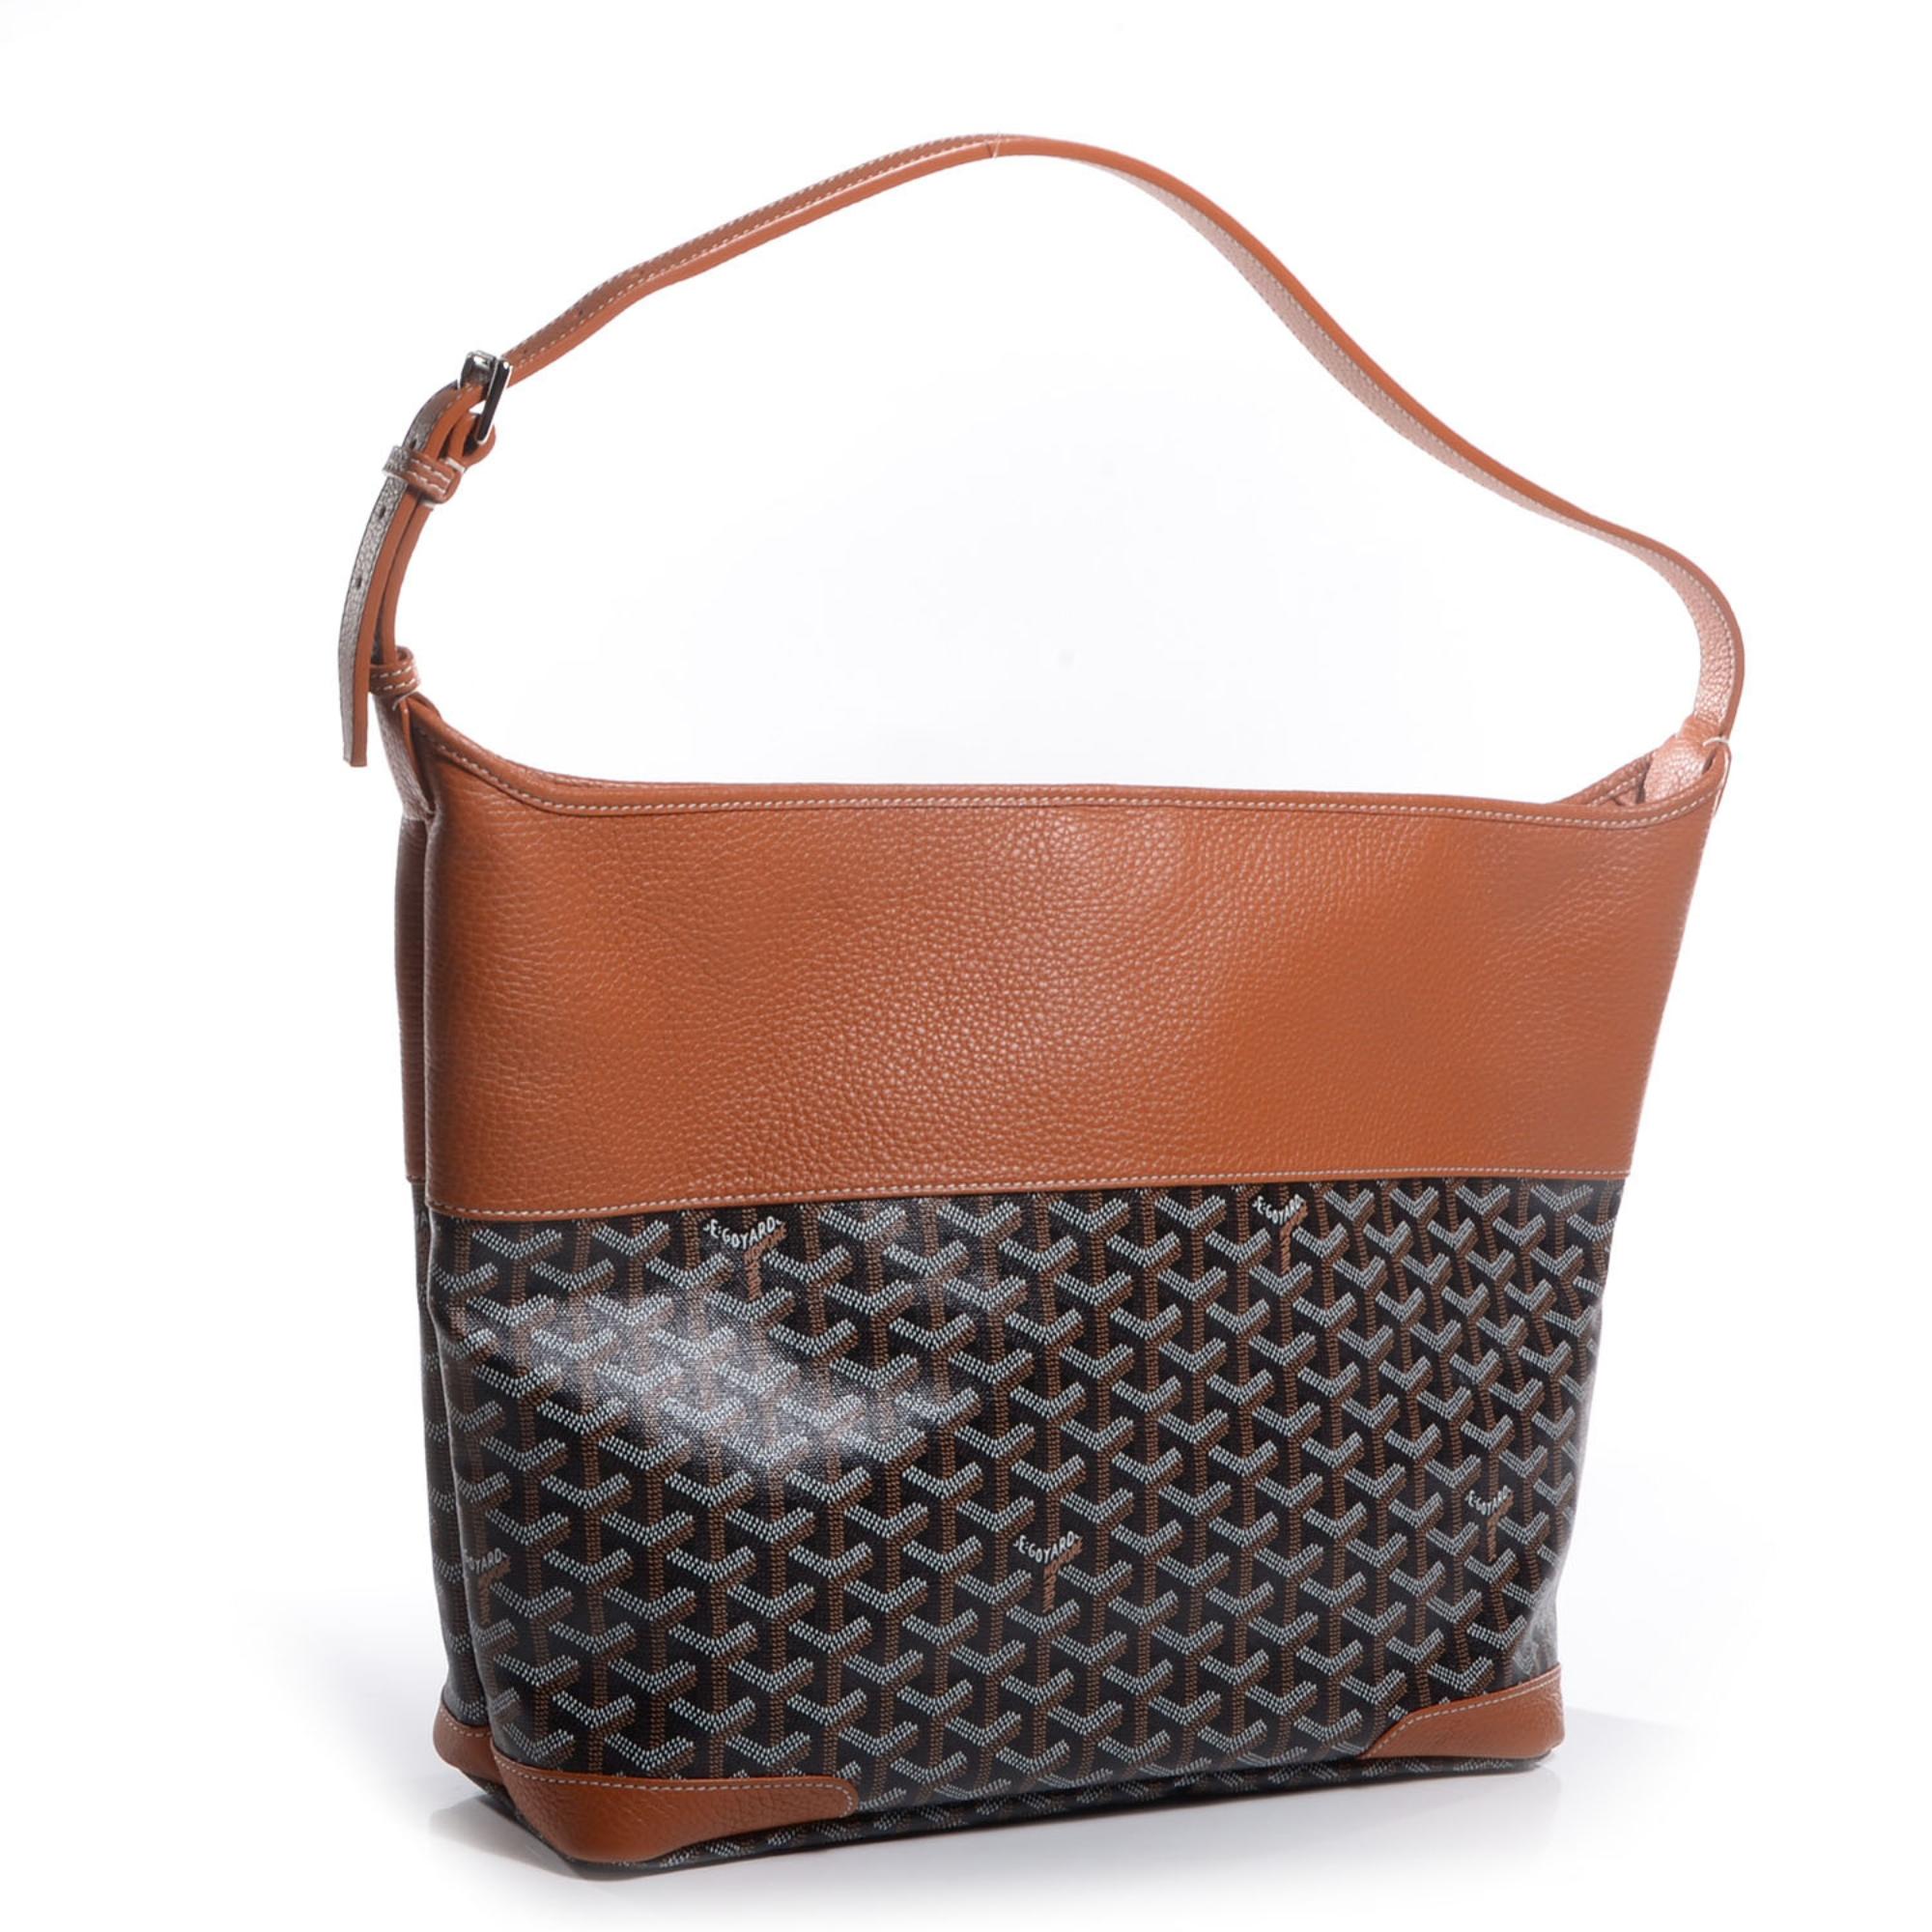 This stylish hobo is crafted of hand painted coated canvas with the classic goyard chevron monogram and a top crest of rich brown leather. The bag features an adjustable flat leather shoulder strap and matching leather trim at the corners. The top